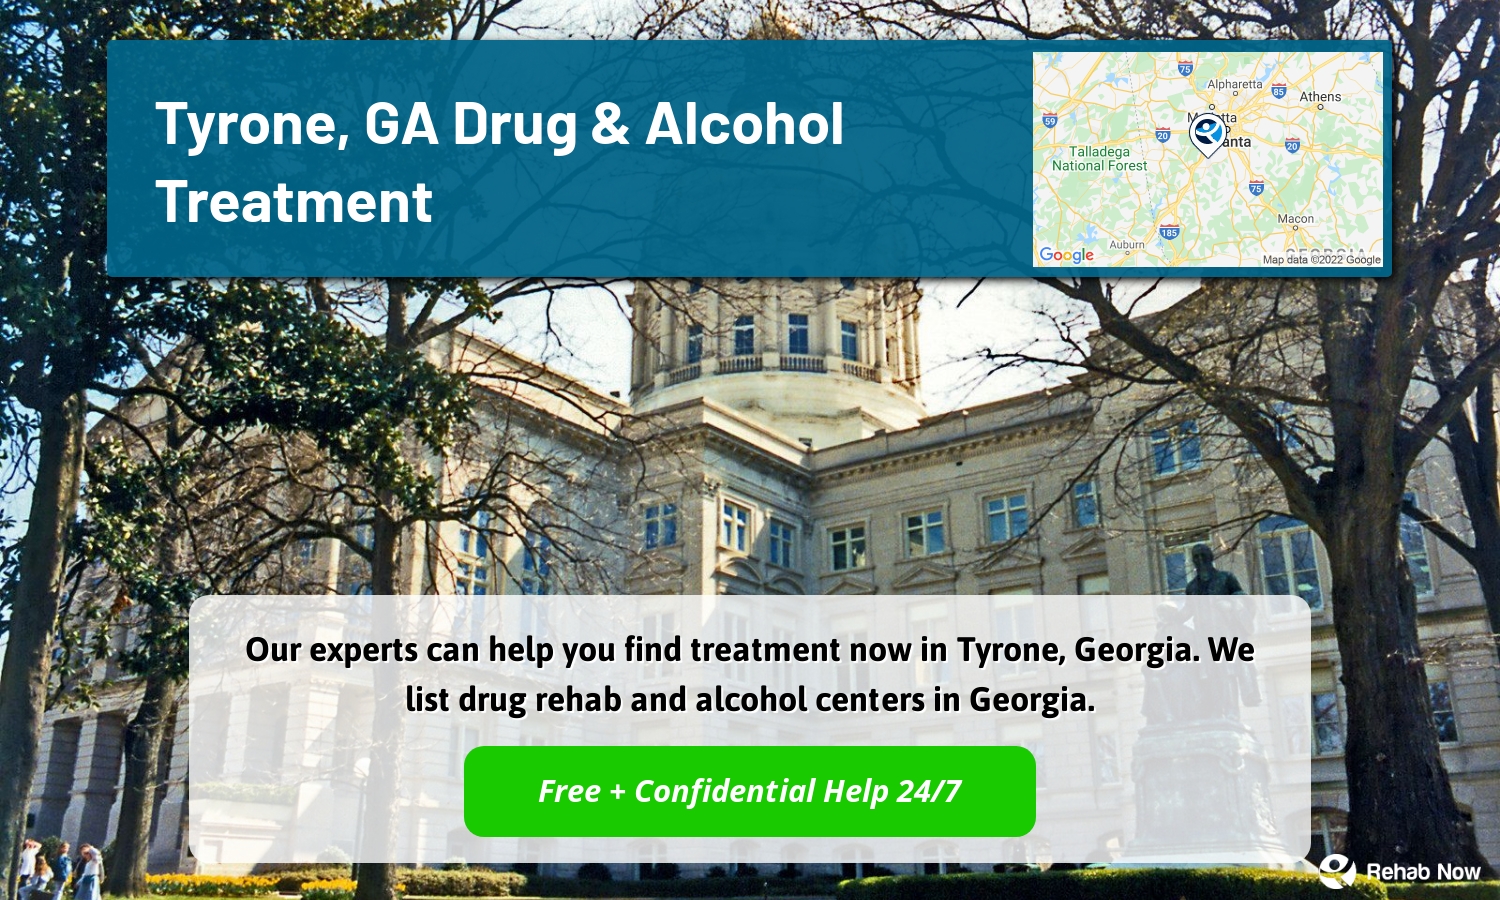 Our experts can help you find treatment now in Tyrone, Georgia. We list drug rehab and alcohol centers in Georgia.